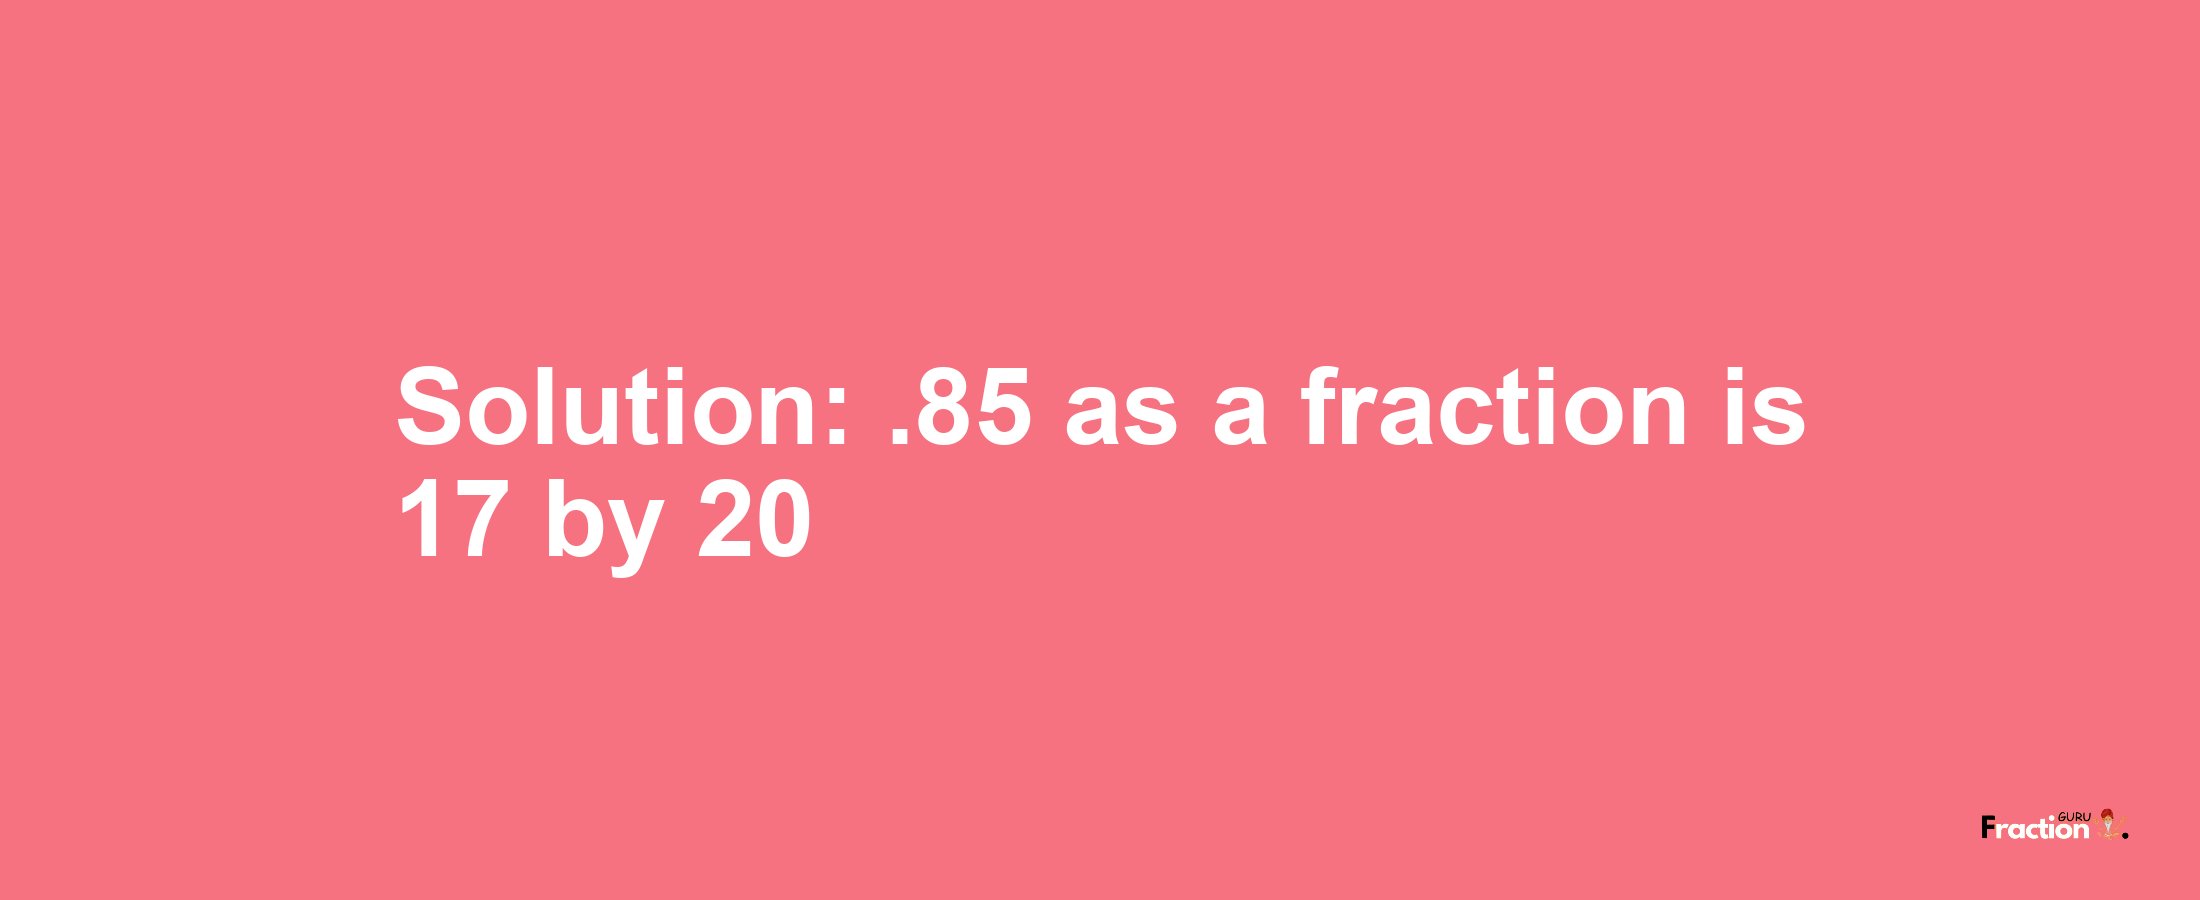 Solution:.85 as a fraction is 17/20